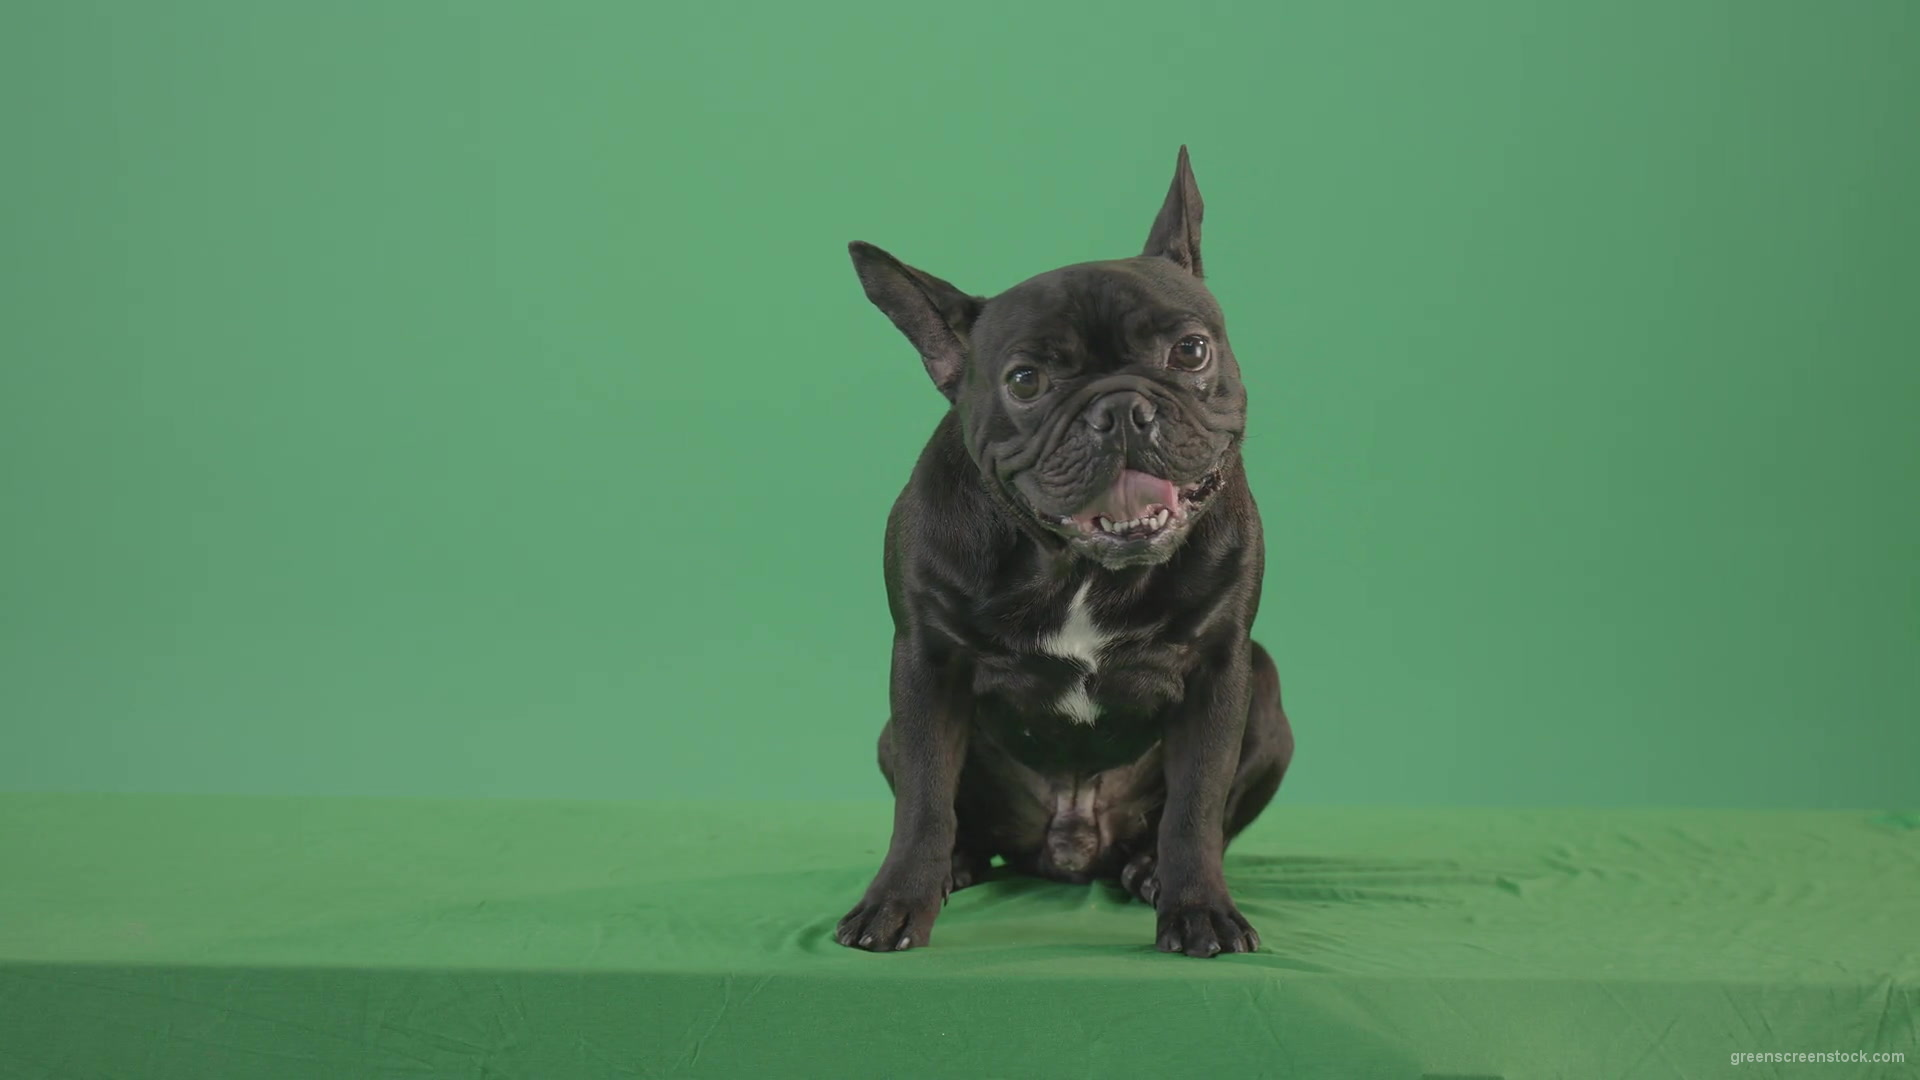 Tired-french-bulldog-sitting-and-posing-in-green-screen-studio-4K-Video-Footage-1920_002 Green Screen Stock